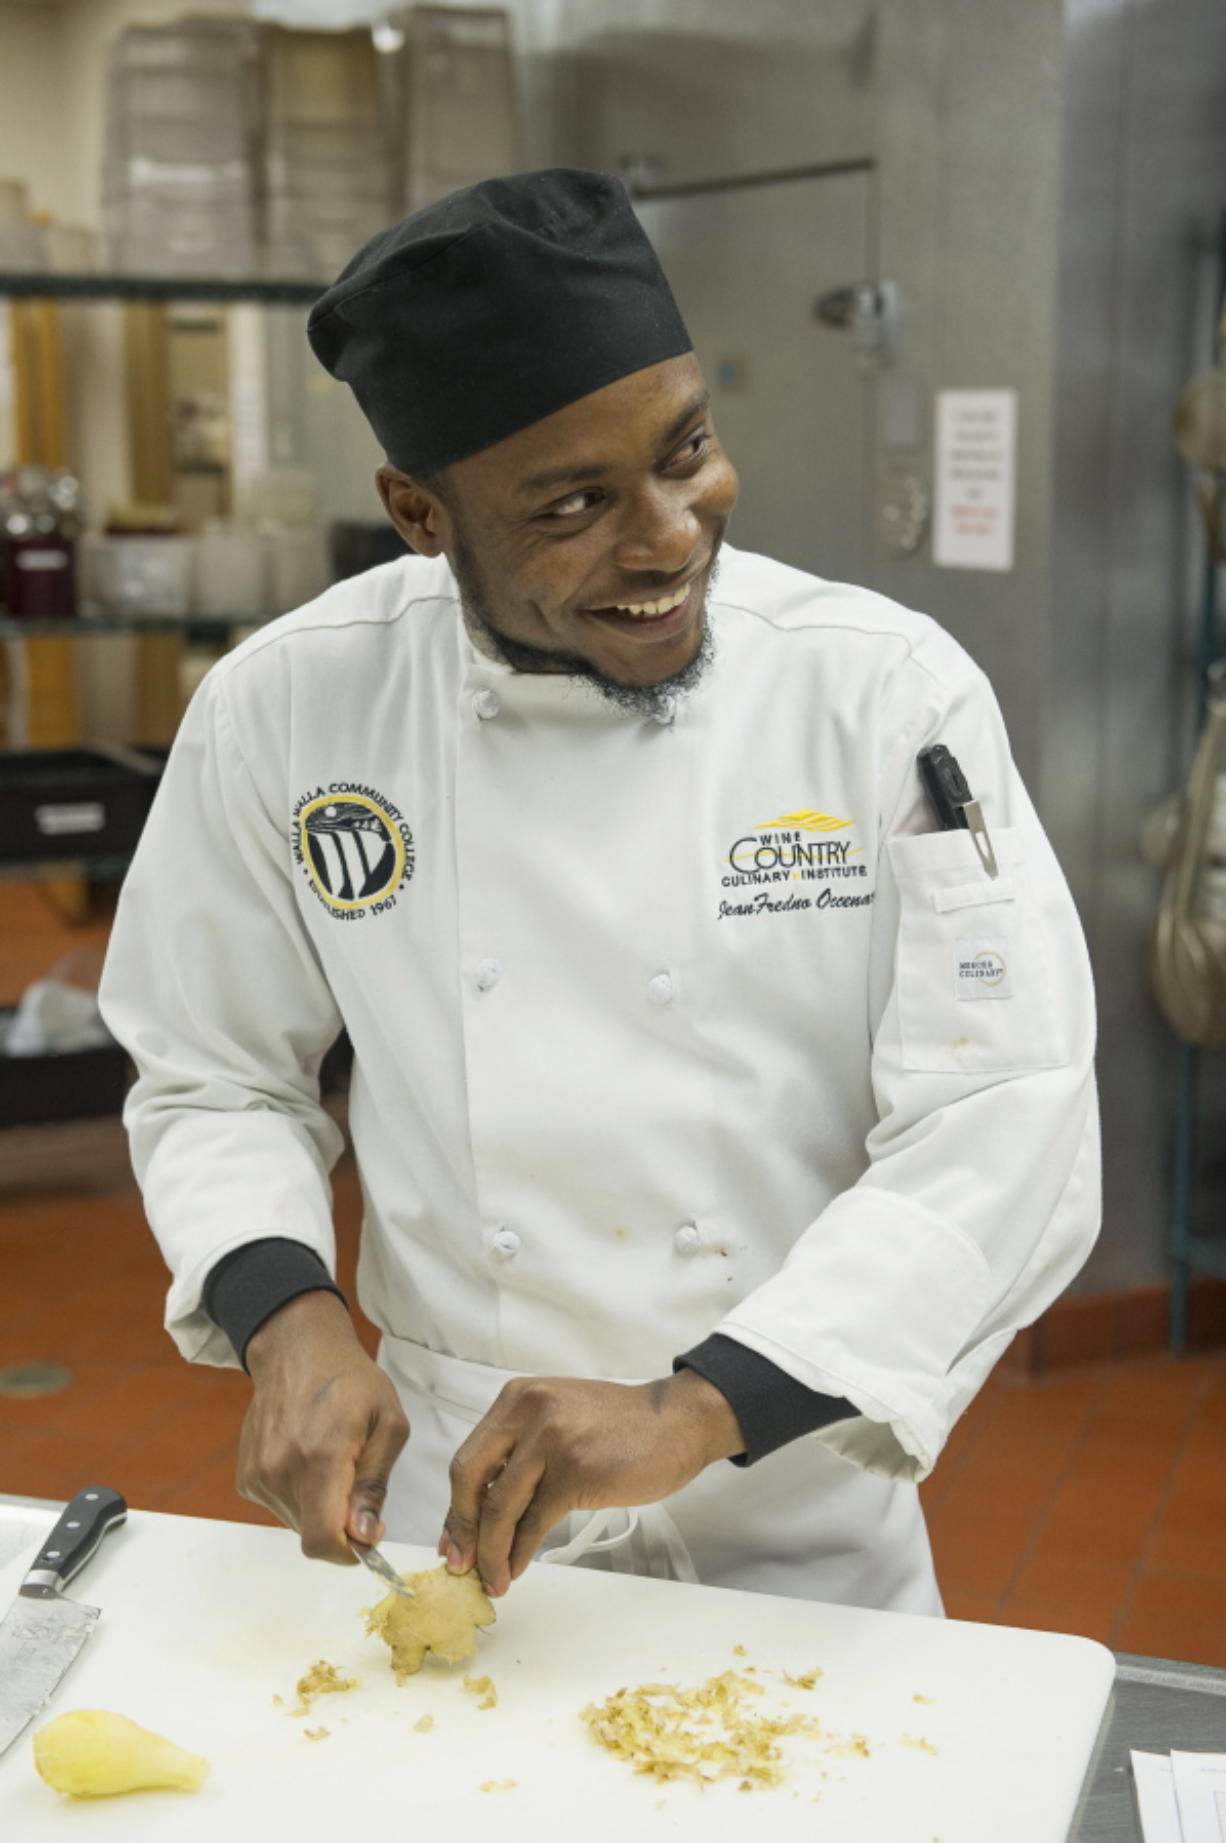 In this March 2, 2018, photo, Jean Fredno Occenc, Walla Walla Community College culinary student from Haiti, attends a cooking class at the school in Walla Walla, Wash. How the Haiti-born cook got here, and enrolled in Walla Walla Community College, is a tale of far more than destiny, however. It’s a story of one Tri-Cities family and their unexpected urge to change at least one life.